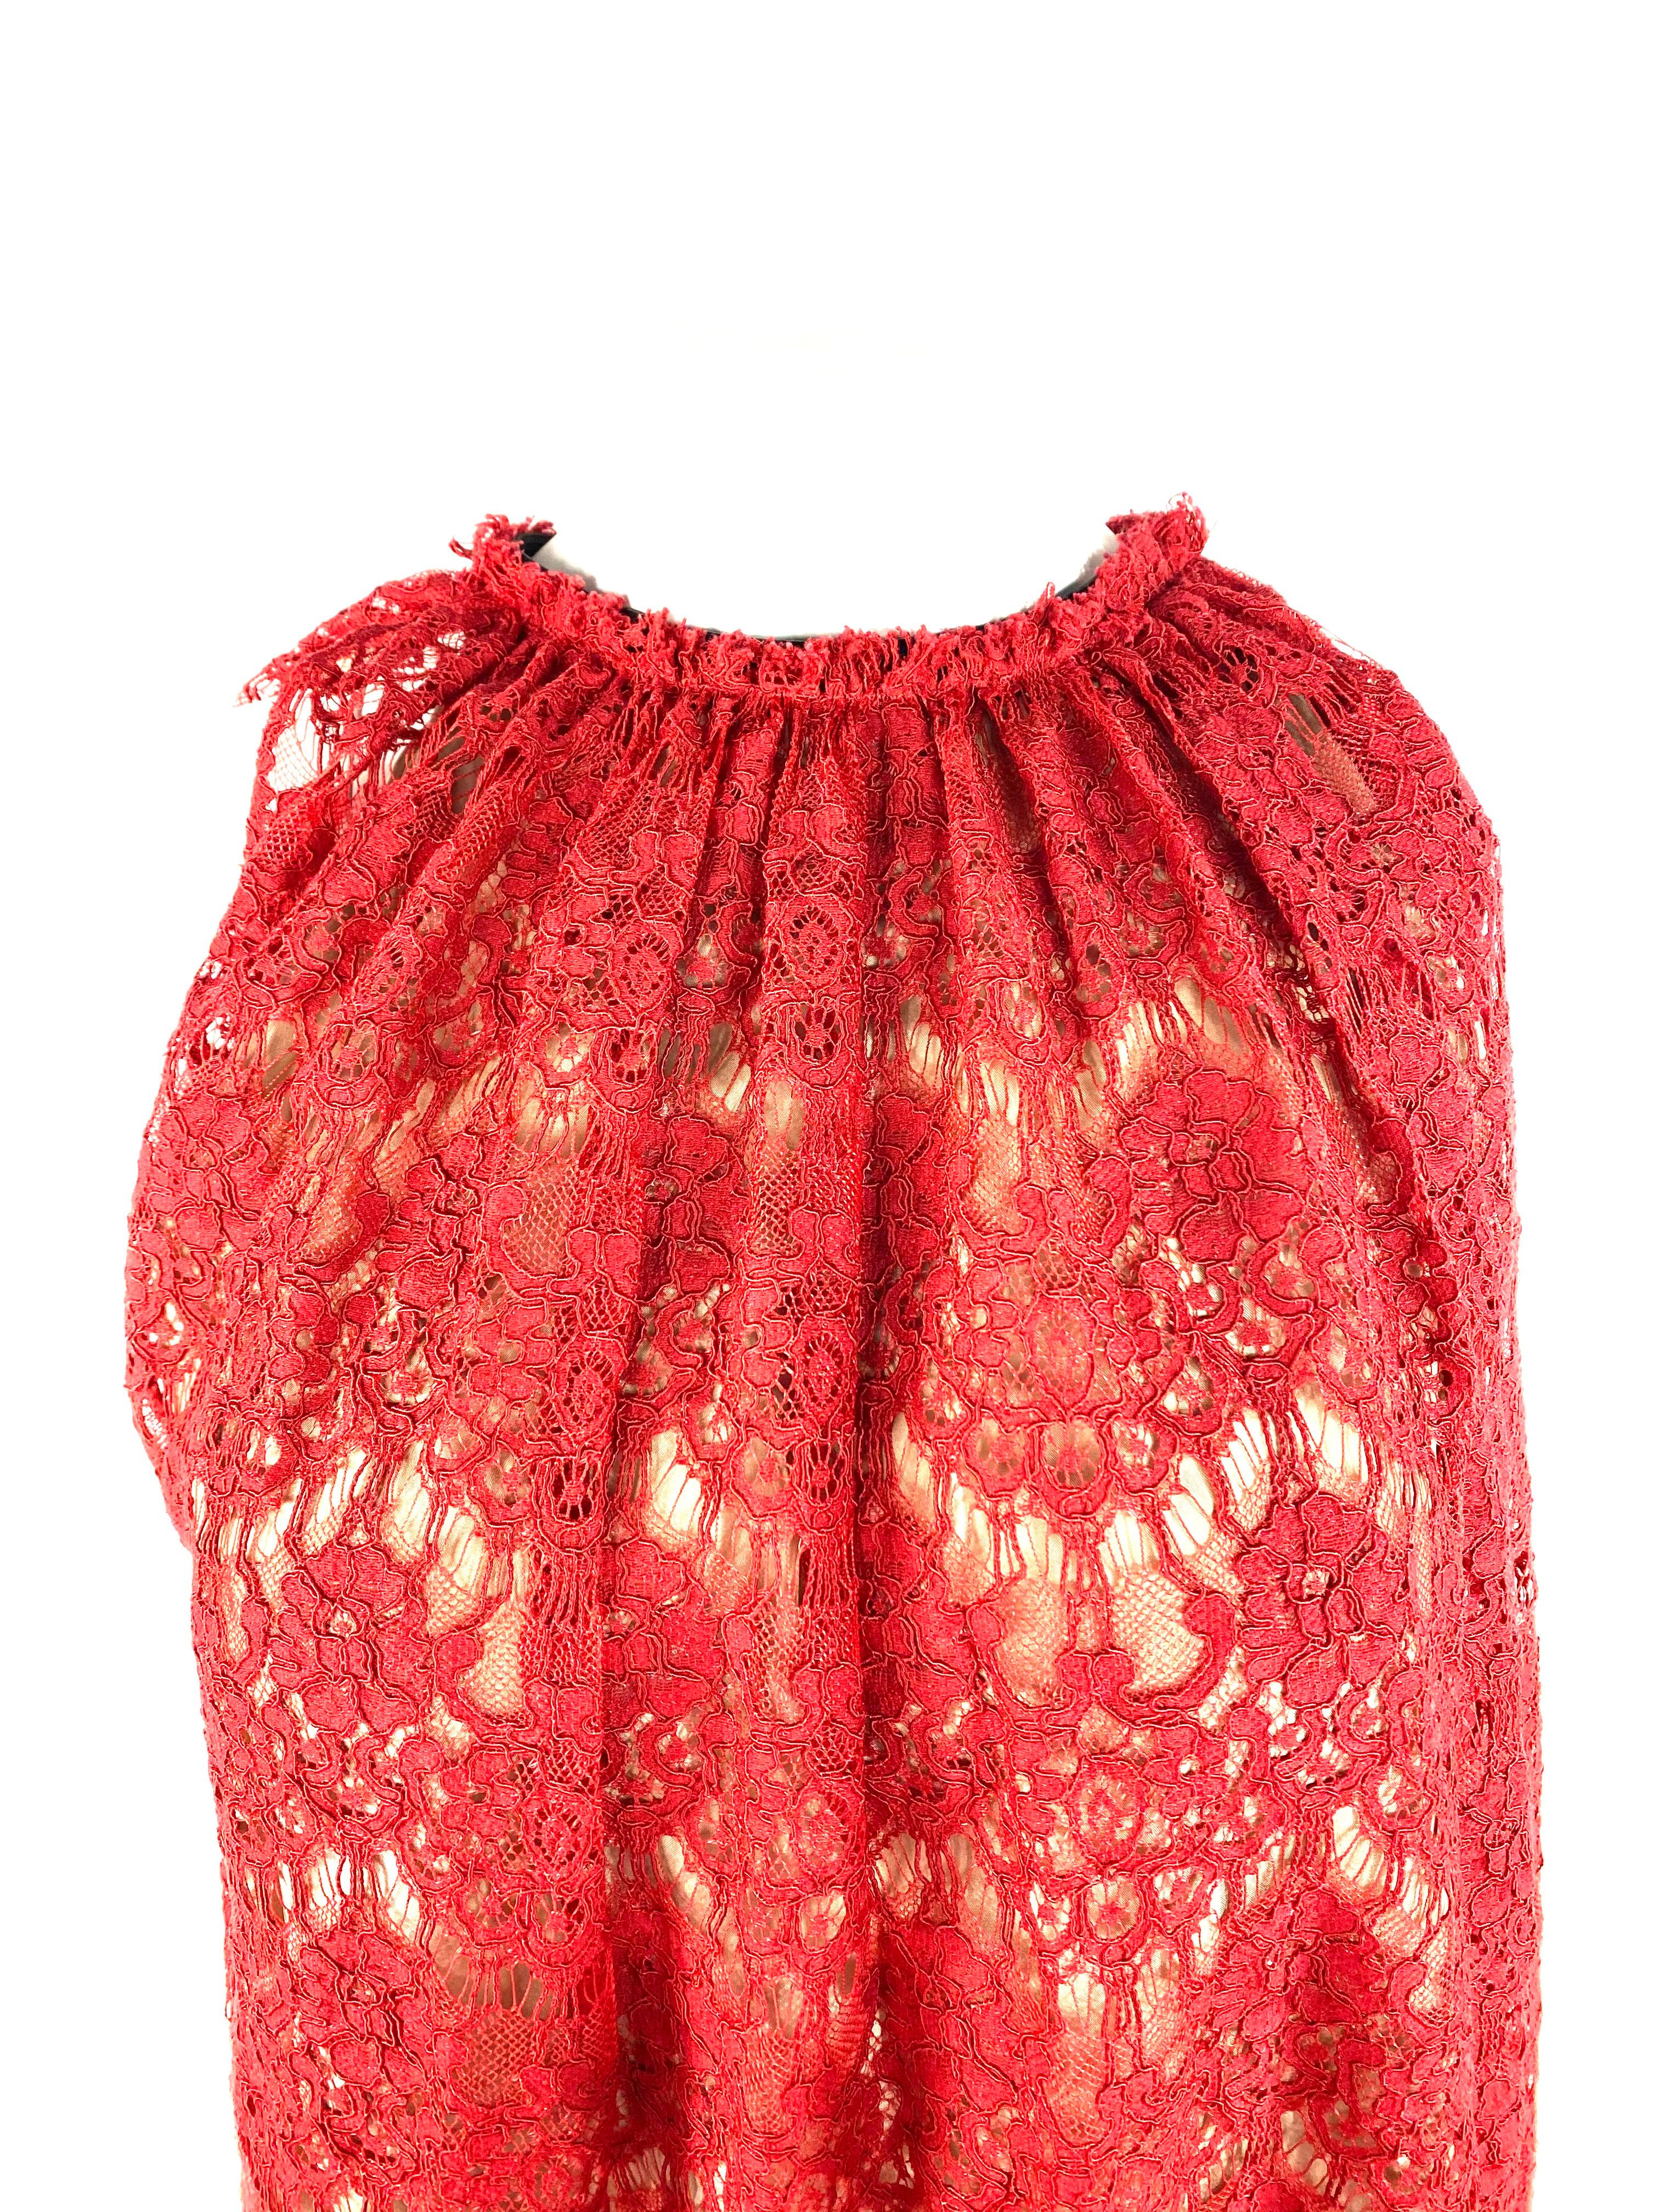 Product details:

The top is designed by Lanvin, it features red floral lace pattern with silk double lining, sleeveless design and hook closure at the neckline.